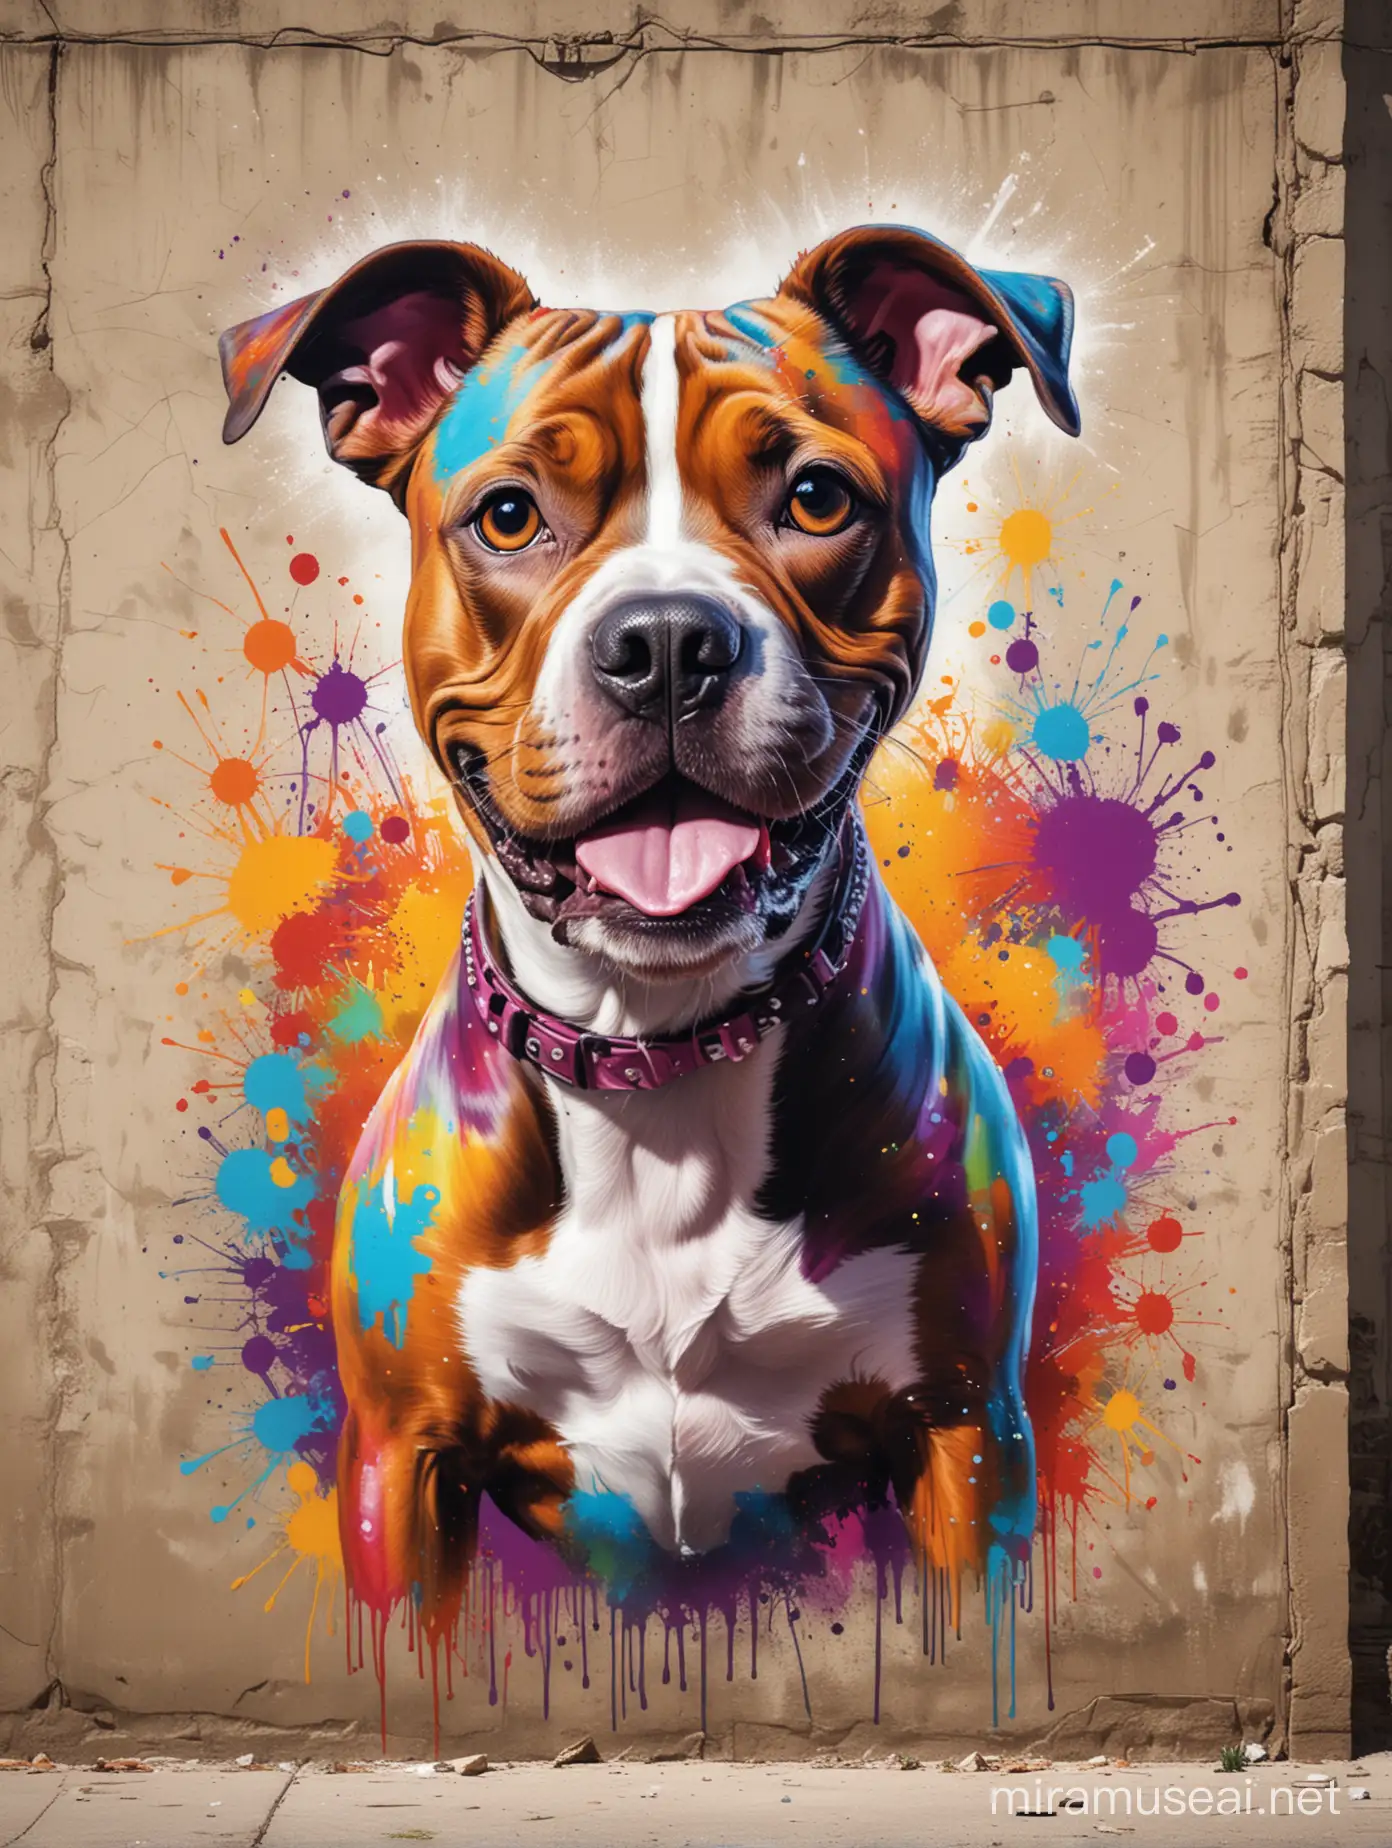 art movement focused on emotional impact through free-flowing shapes and colors, often without depicting real objects,
Create a graffiti of a tiny happy American Pit Bull Terrier Dog on the foreground, colorful graffiti art, on a wall, rustic background, graffiti art style